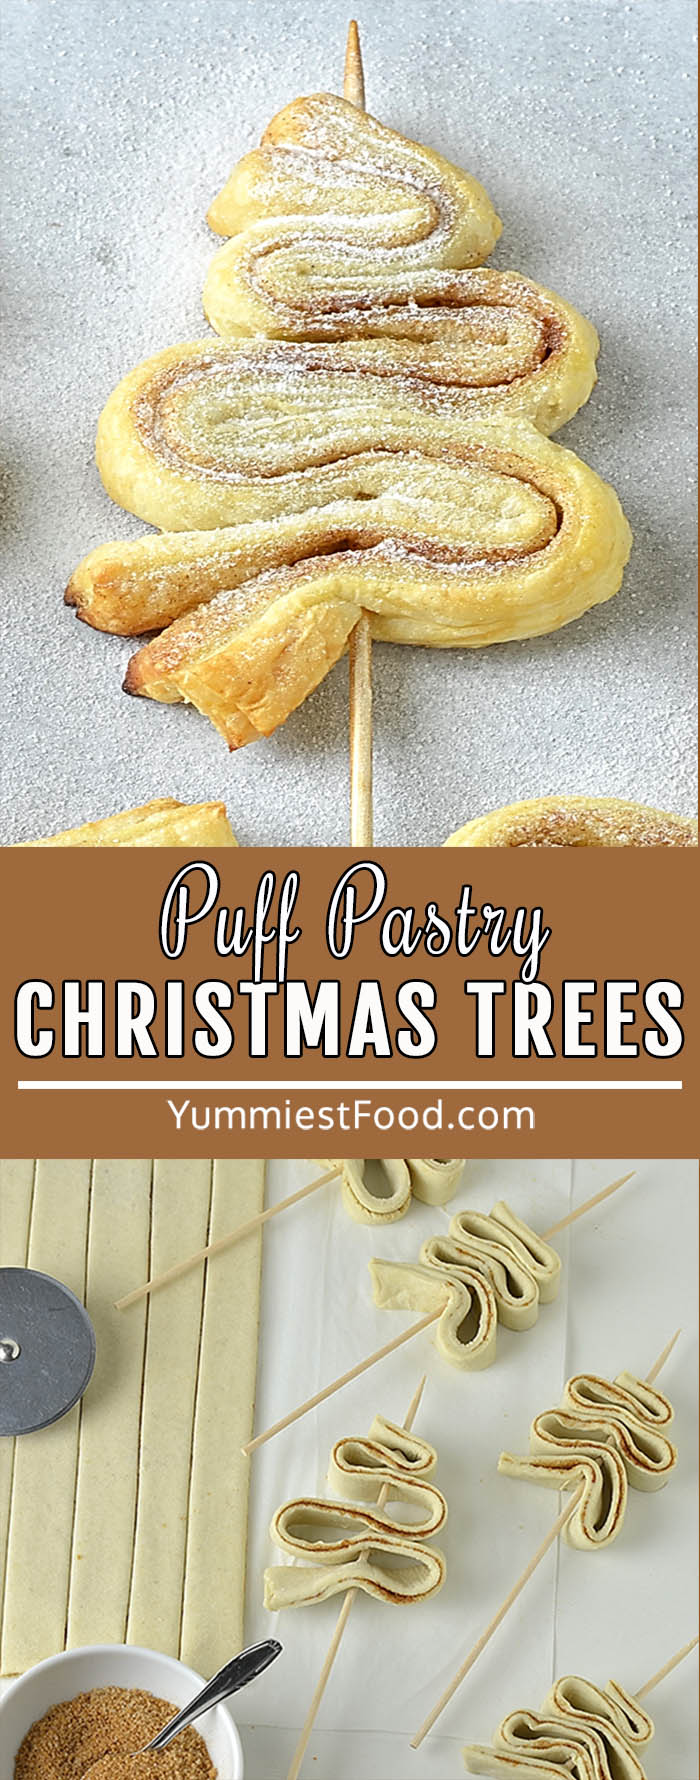 A fun and delicious Christmas treat shaped like Christmas Trees. Flaky Puff Pastry Christmas Trees with cinnamon sugar filling. They’re crunchy, and flavorful and are perfect for the Holidays!